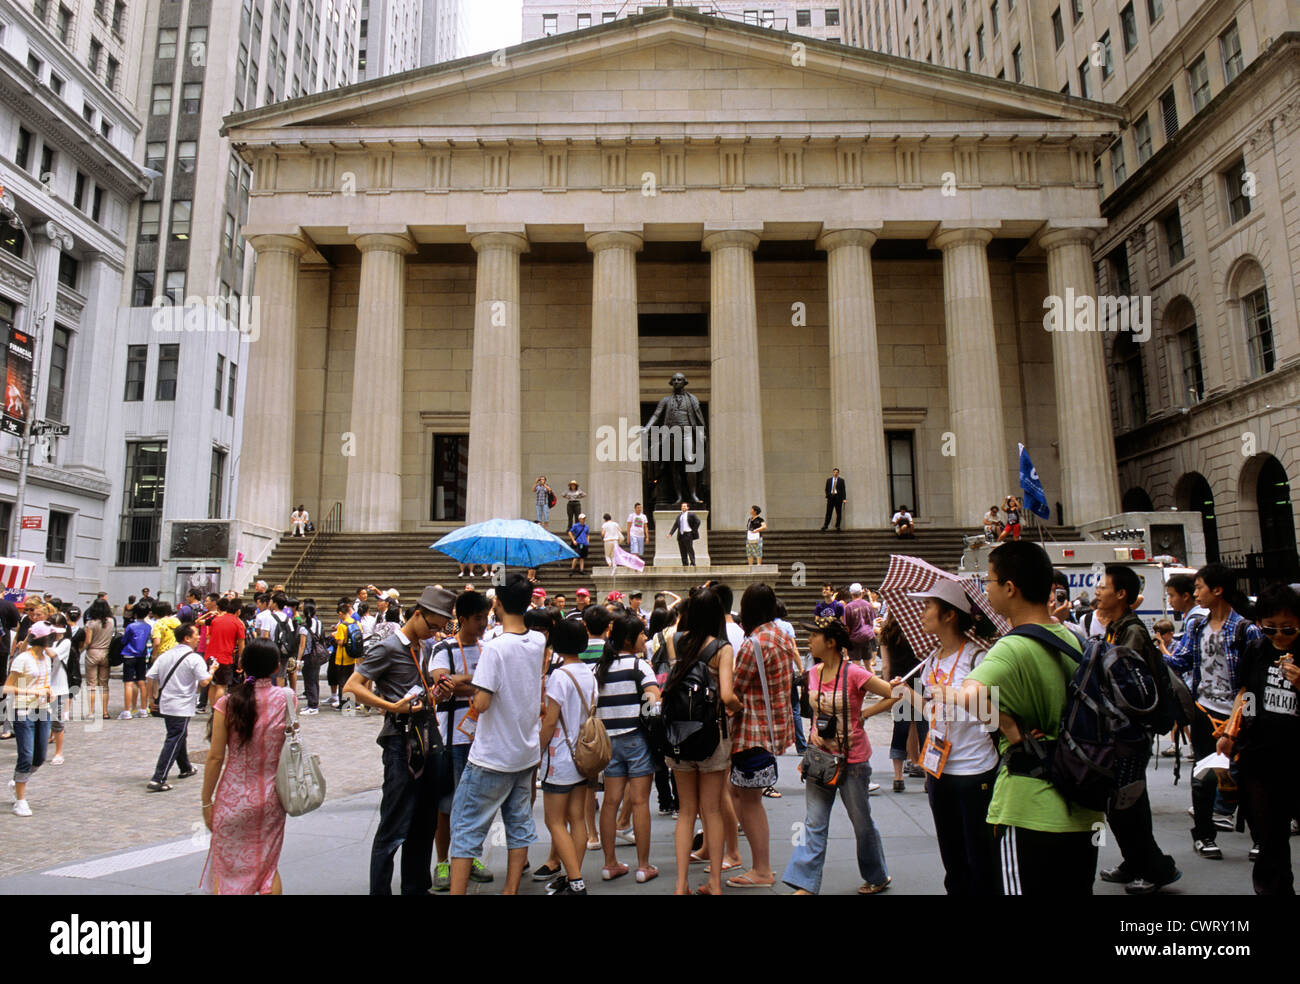 Federal Hall National Memorial Museum New York City on Wall Street  Financial District on Lower Manhattan. Street scene with crowds of people.  USA Stock Photo - Alamy